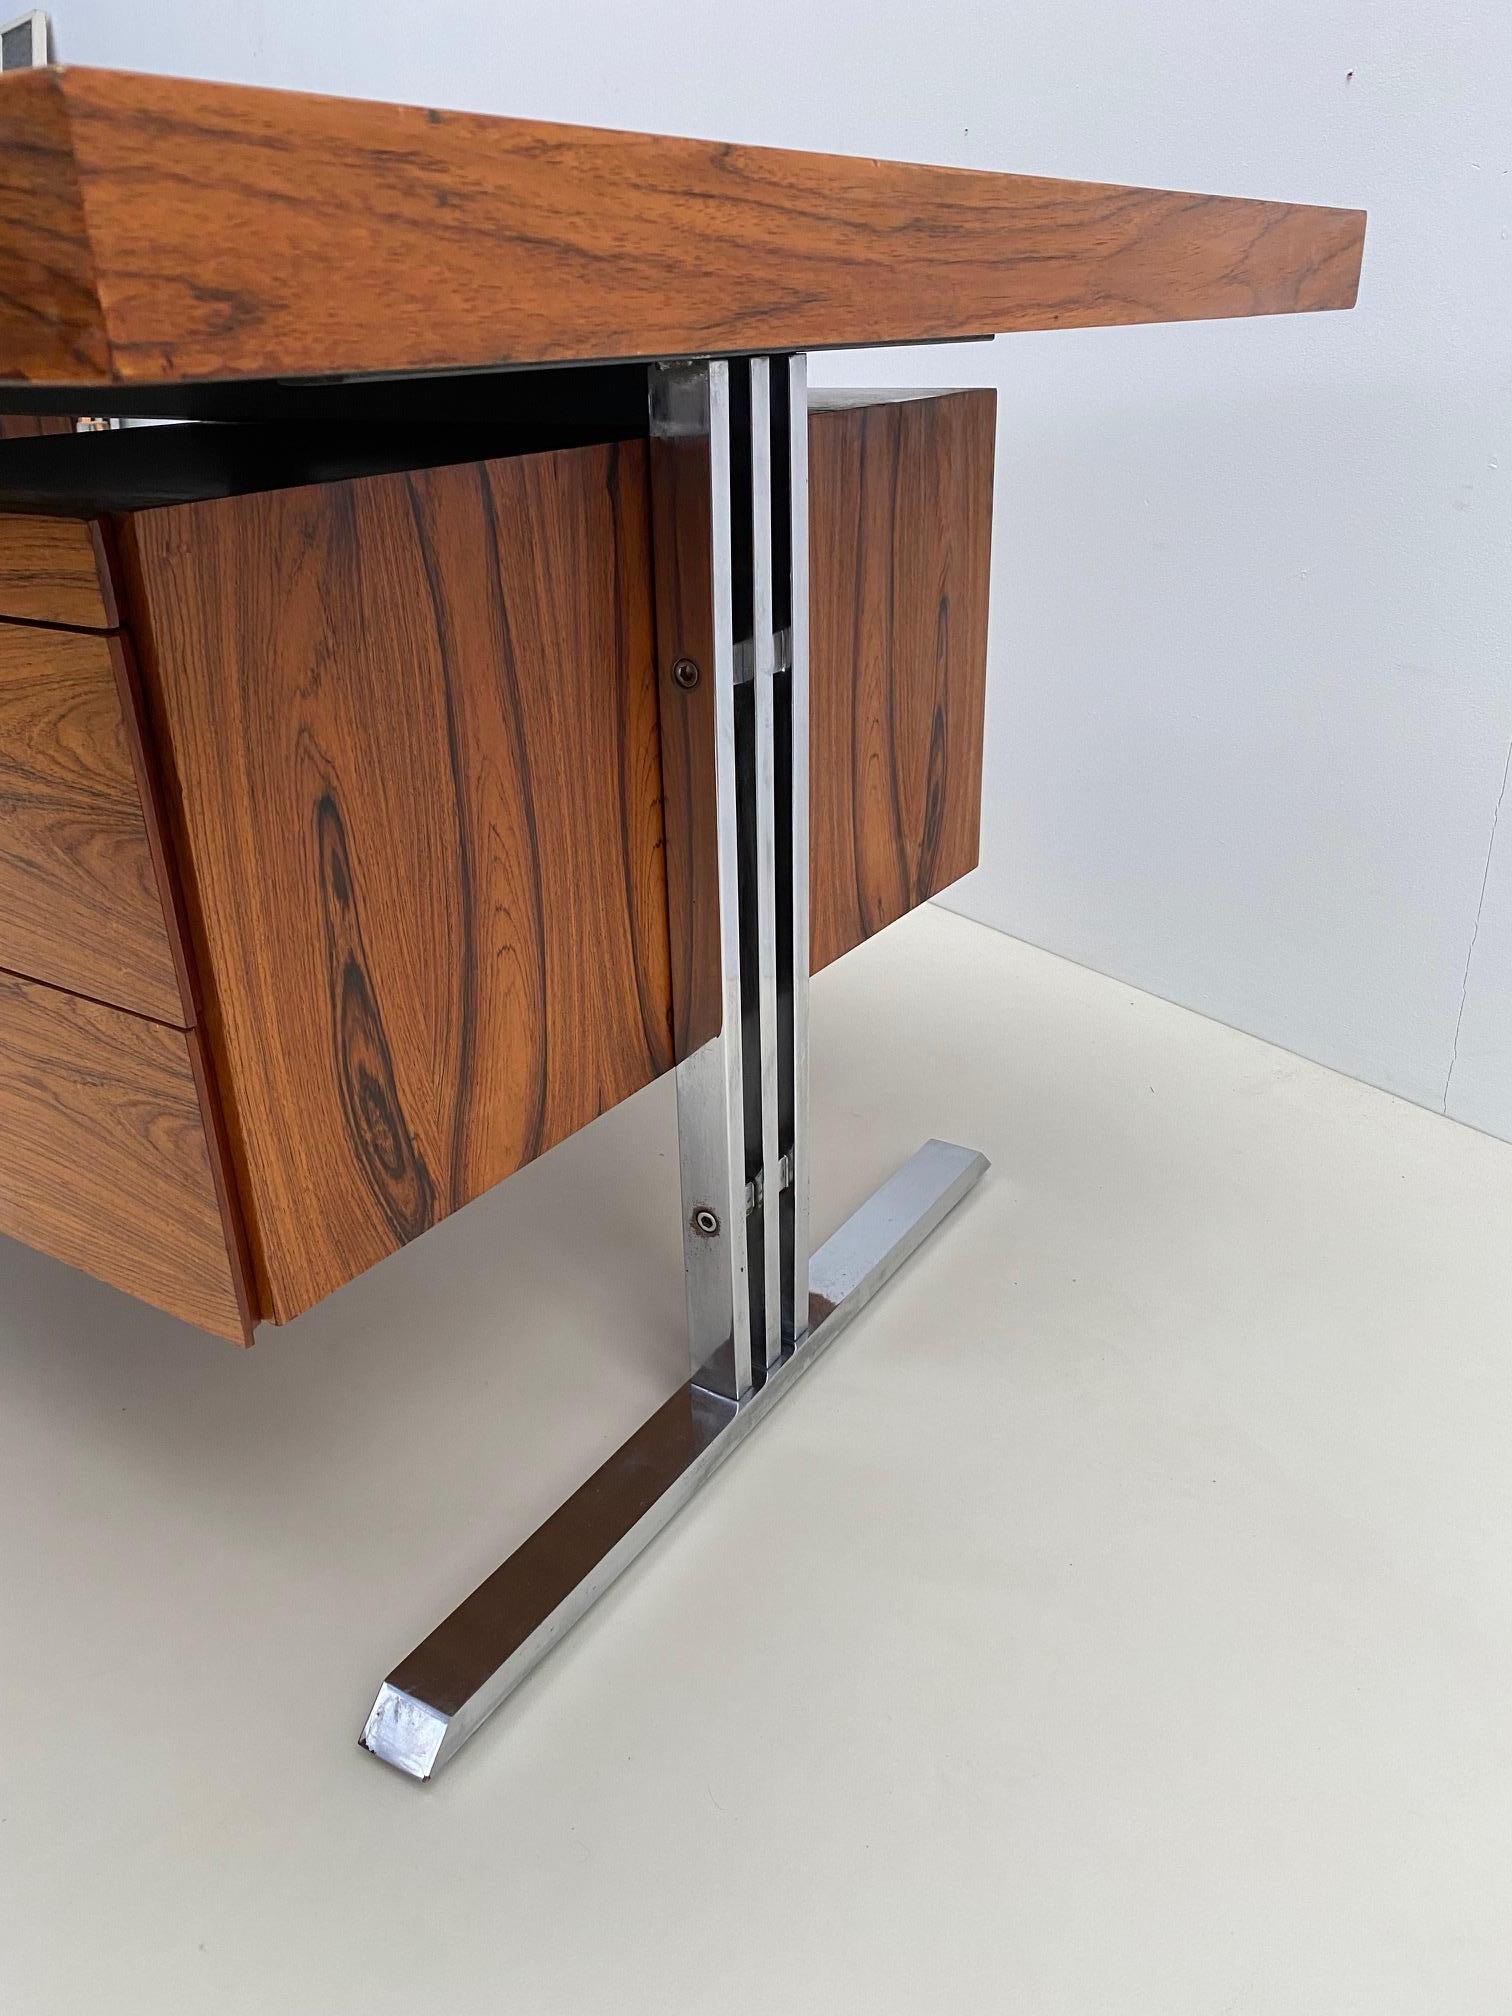 Mid-Century Modern Italian Desk with Drawers , Wood and Chrome, 1970s For Sale 1